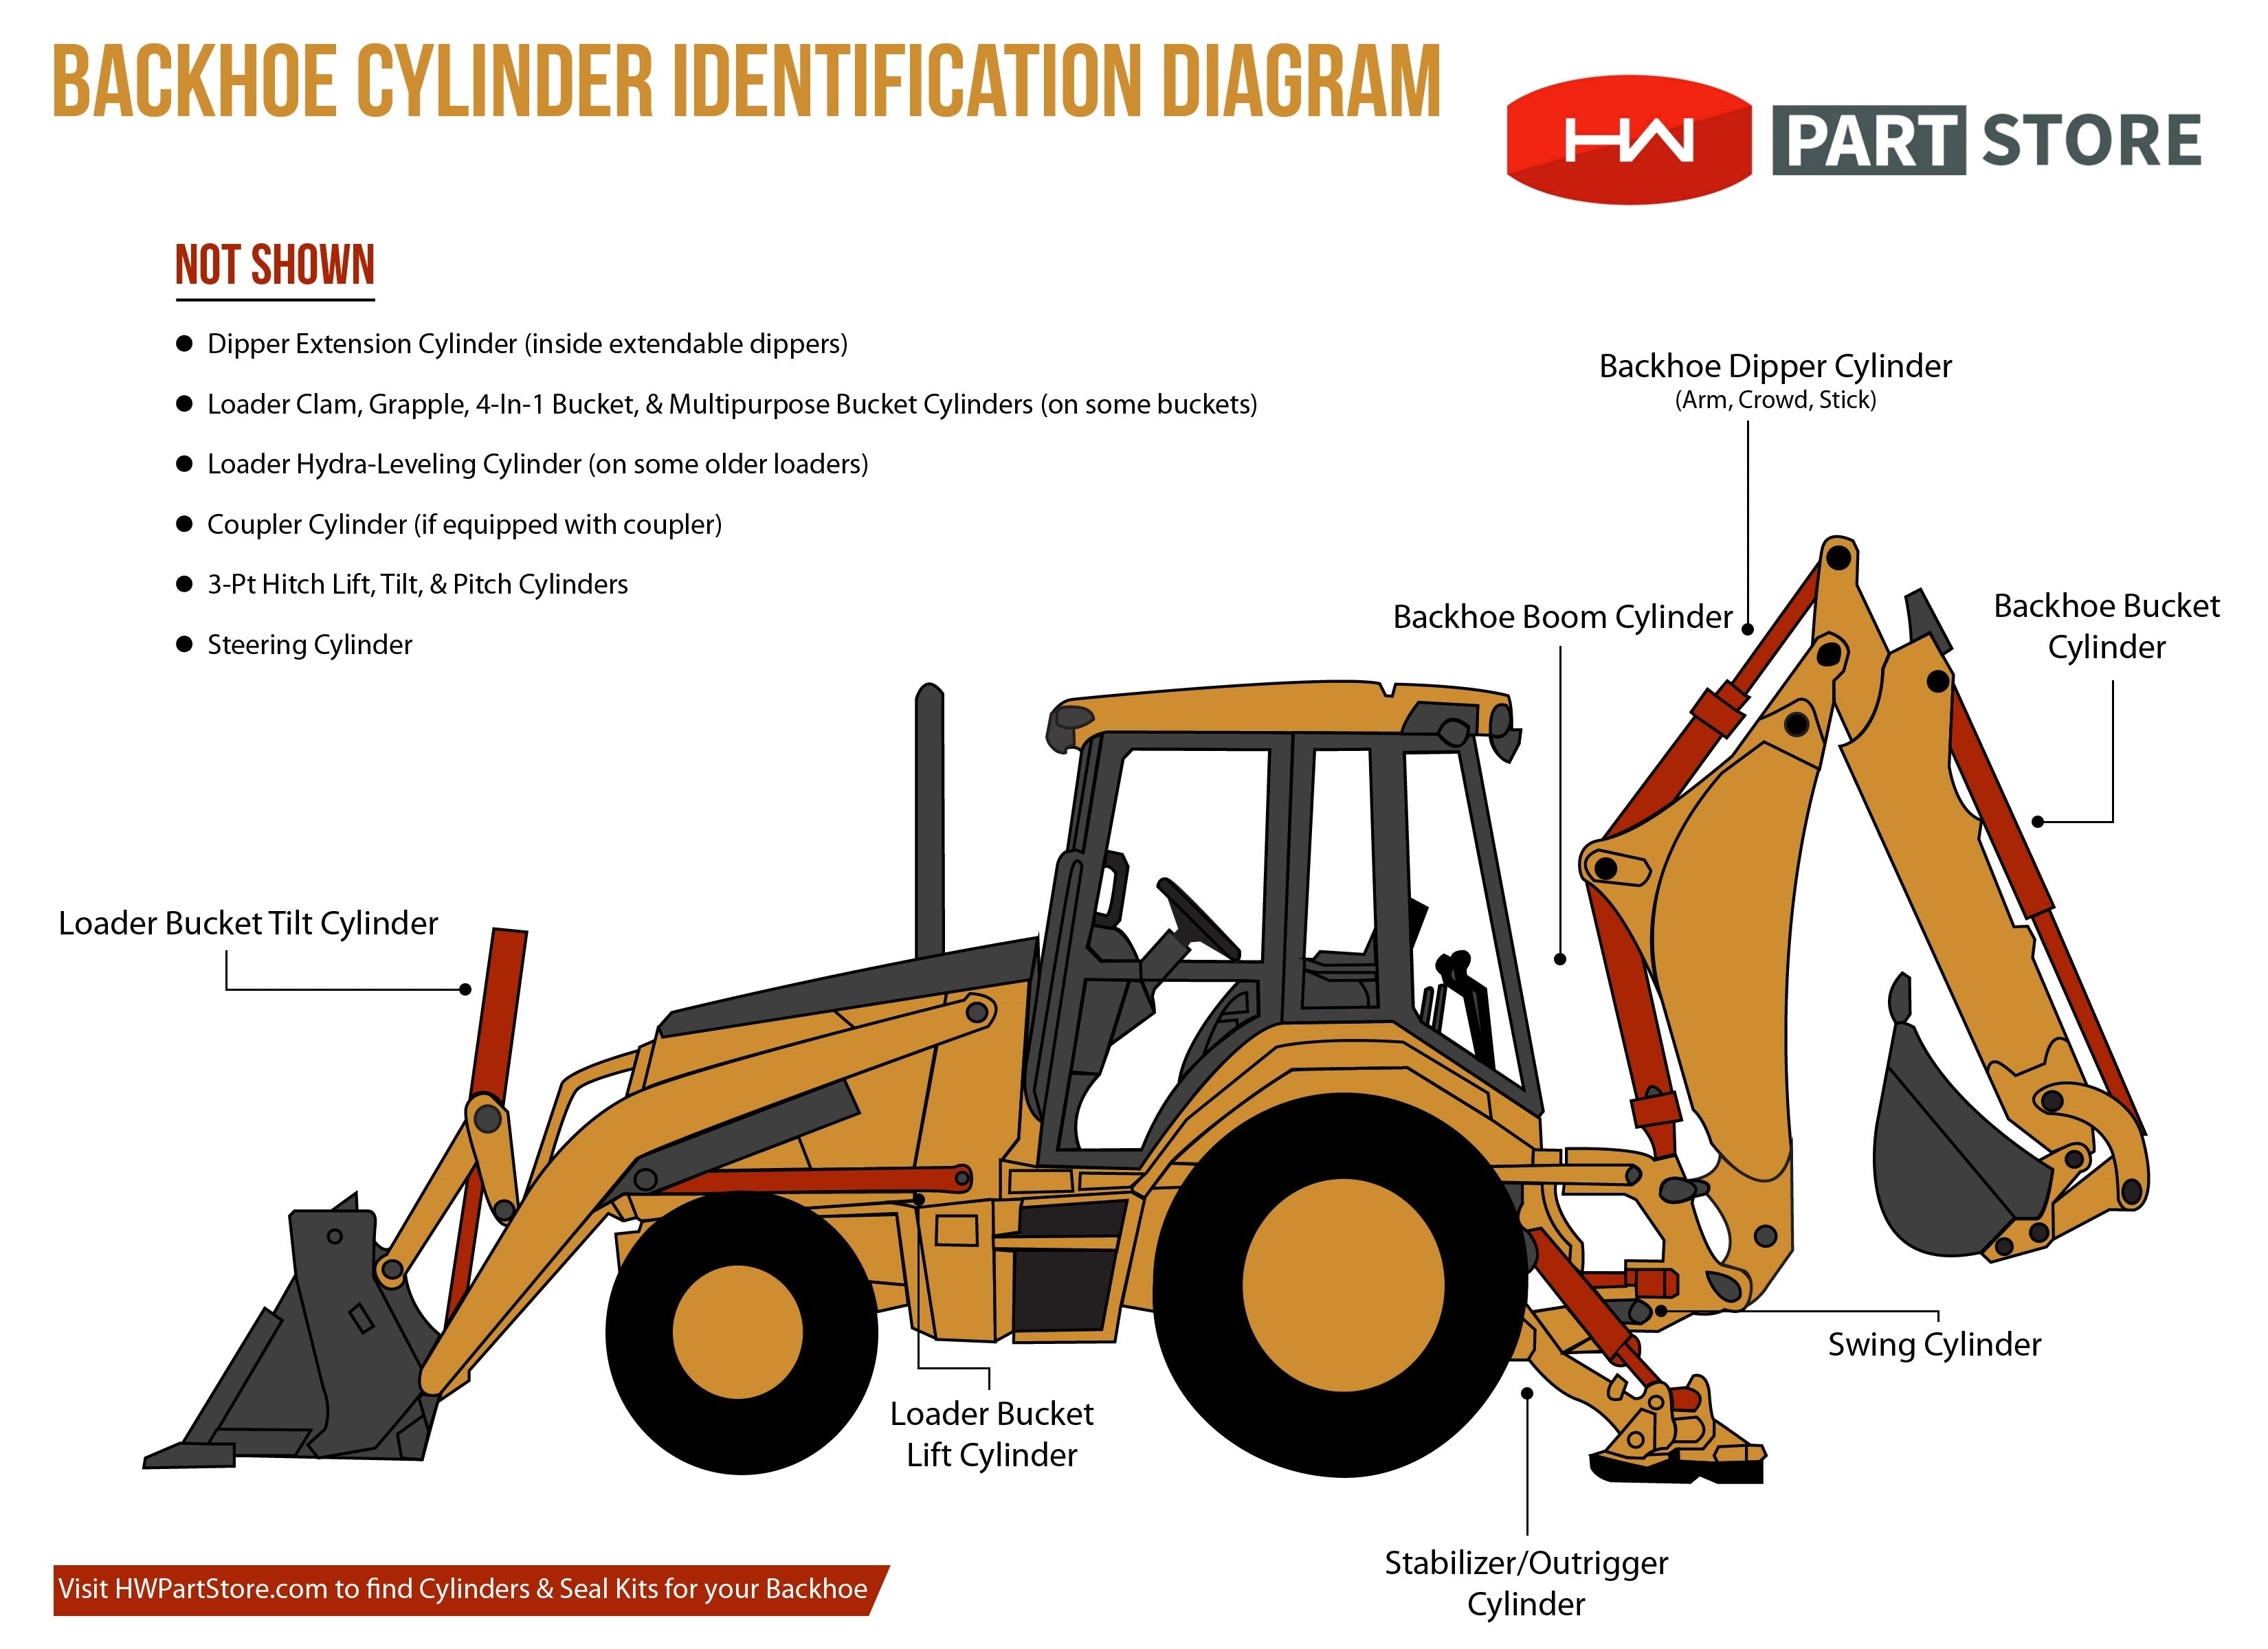 Identifying Backhoe Cylinders | Part Store